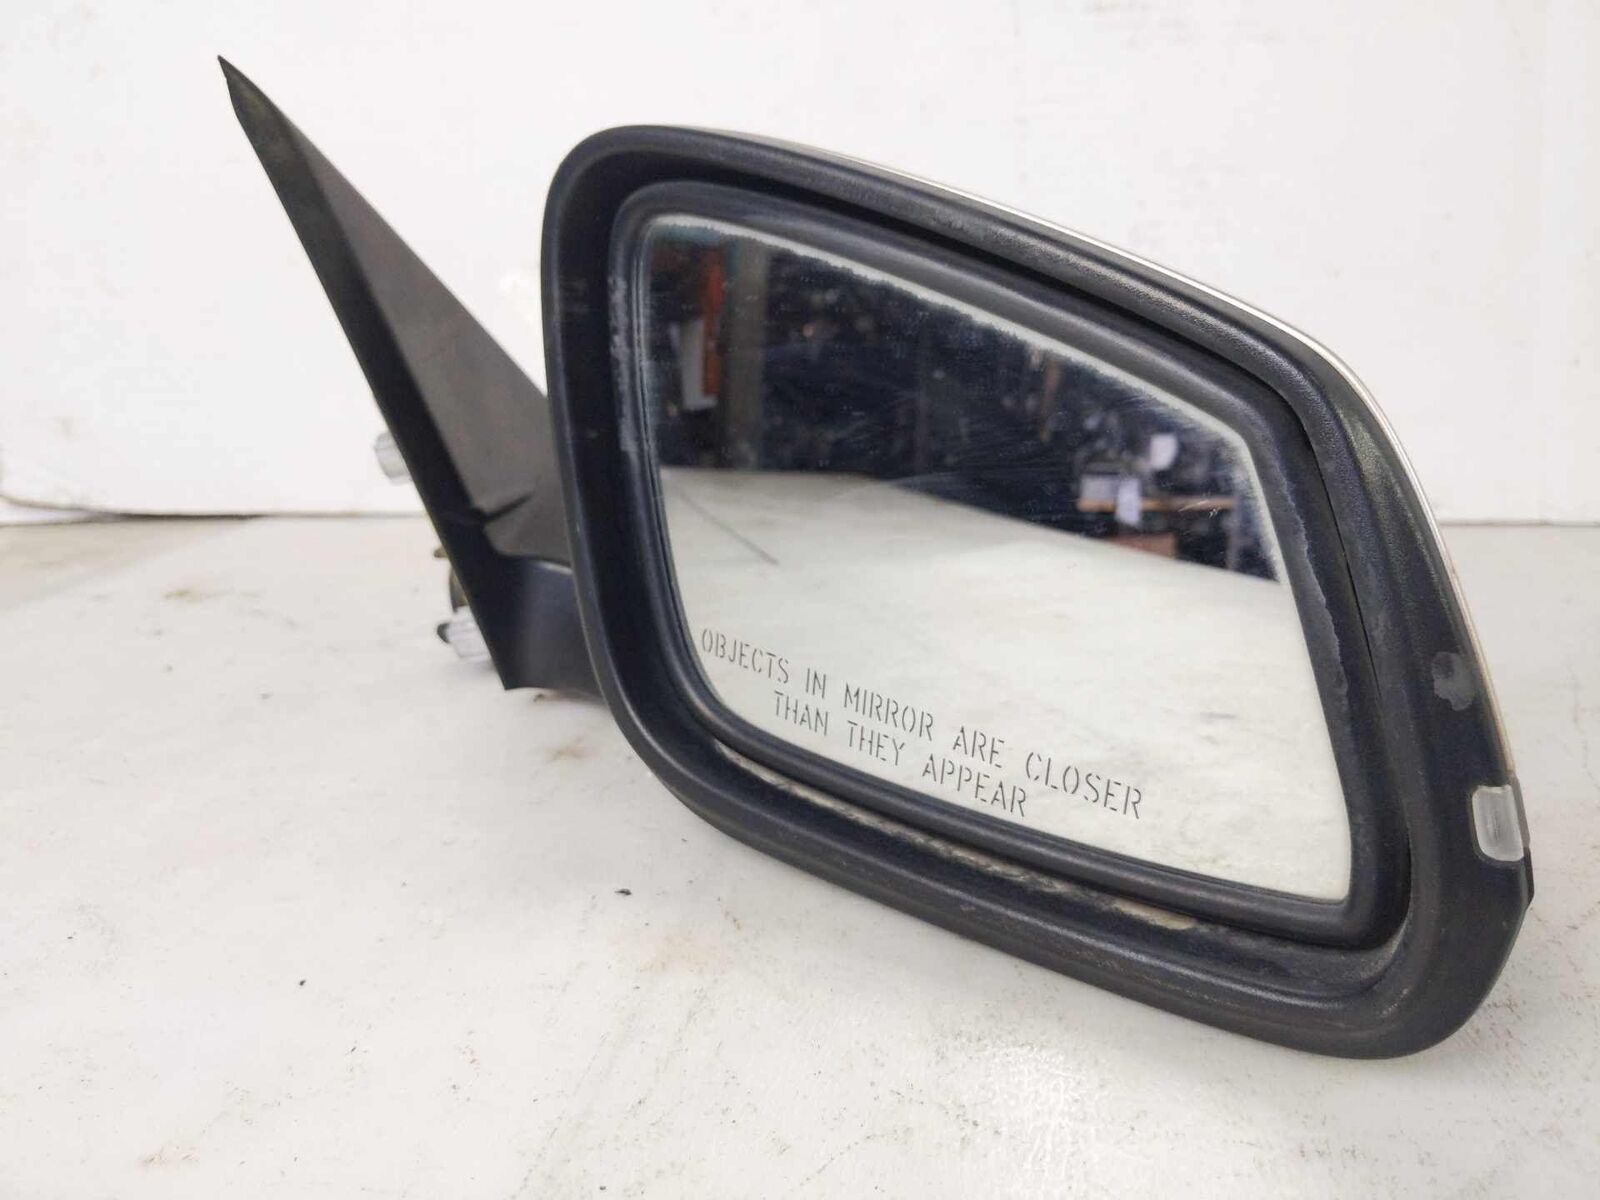 Door Mirror Right Passenger Side View Assembly Beige OEM BMW 328 SERIES 12 13